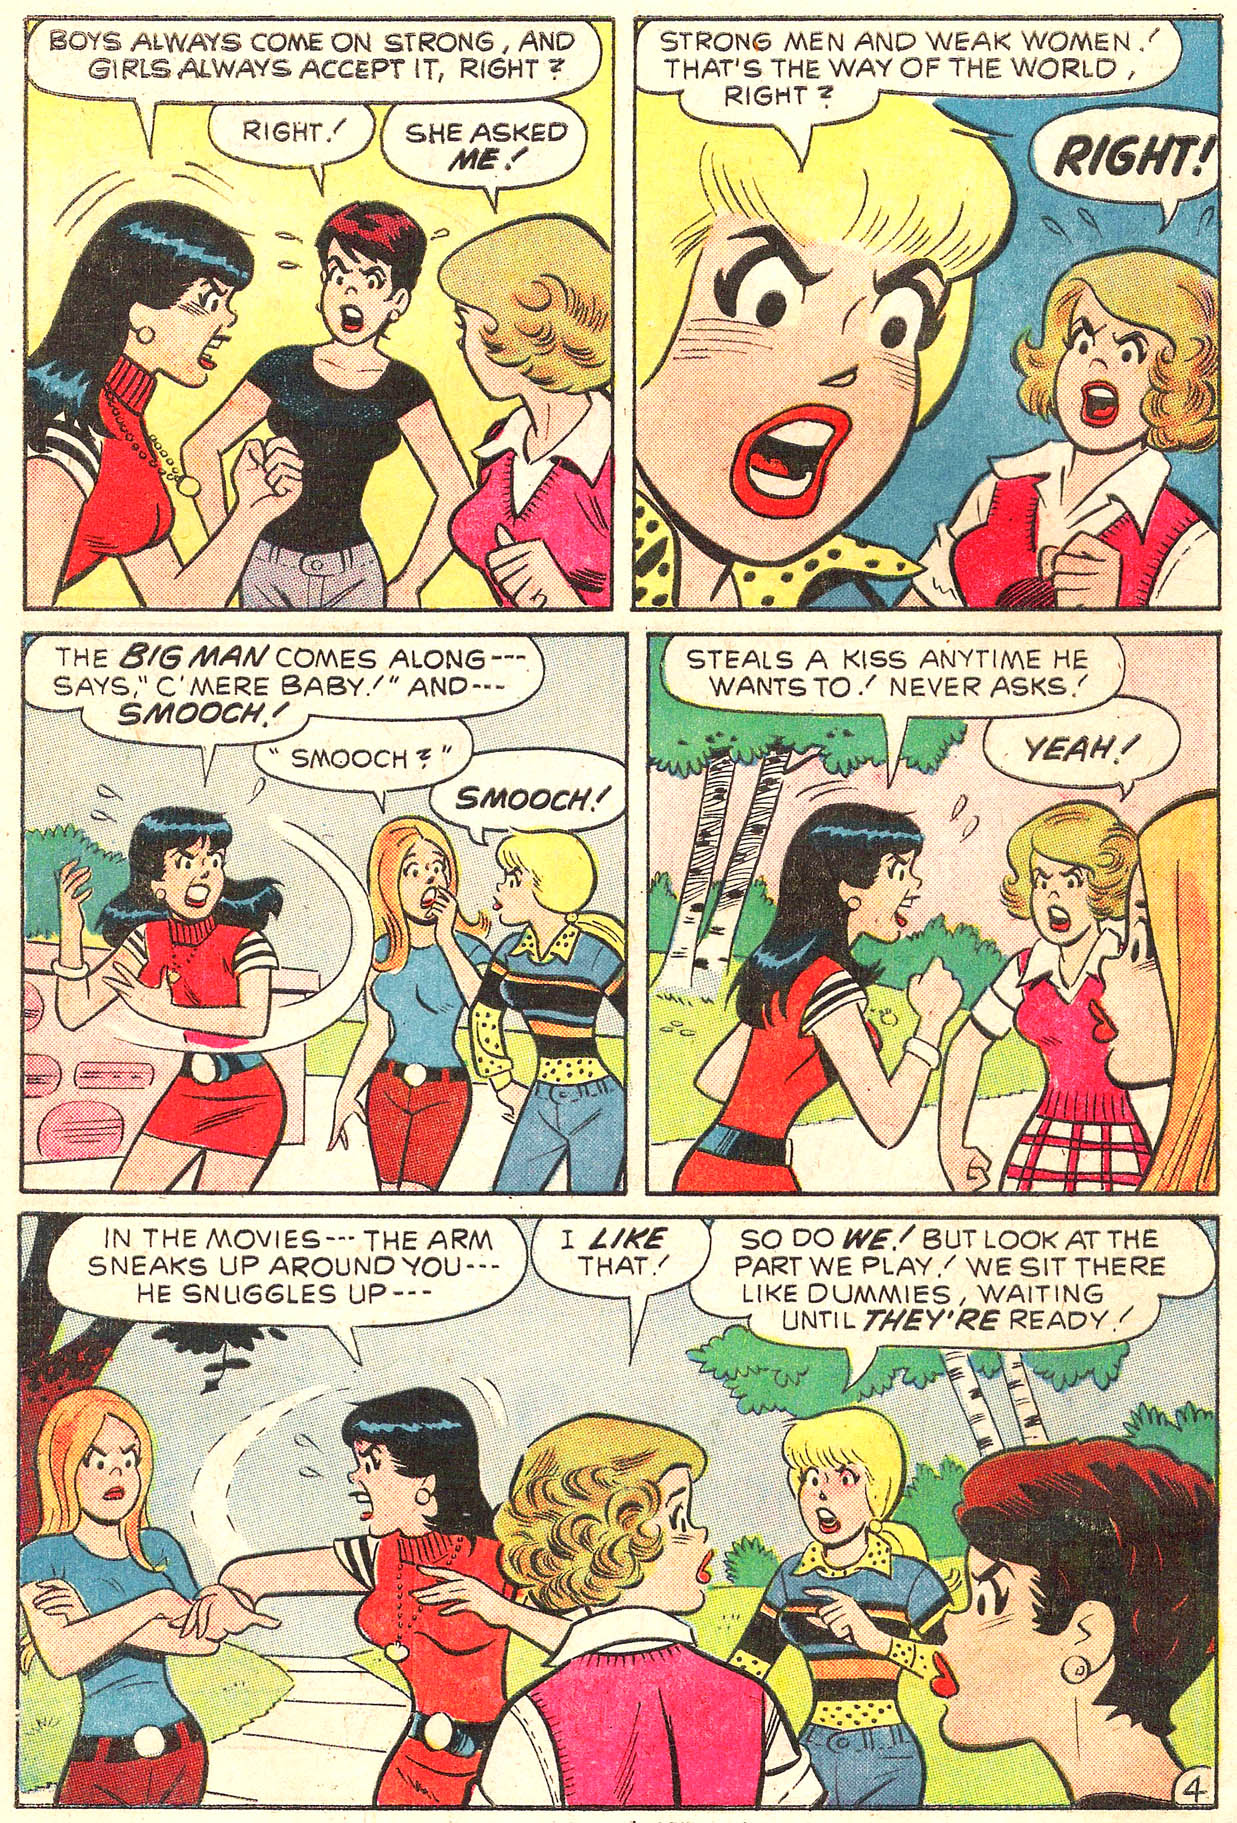 Read online Archie's Girls Betty and Veronica comic -  Issue #217 - 6